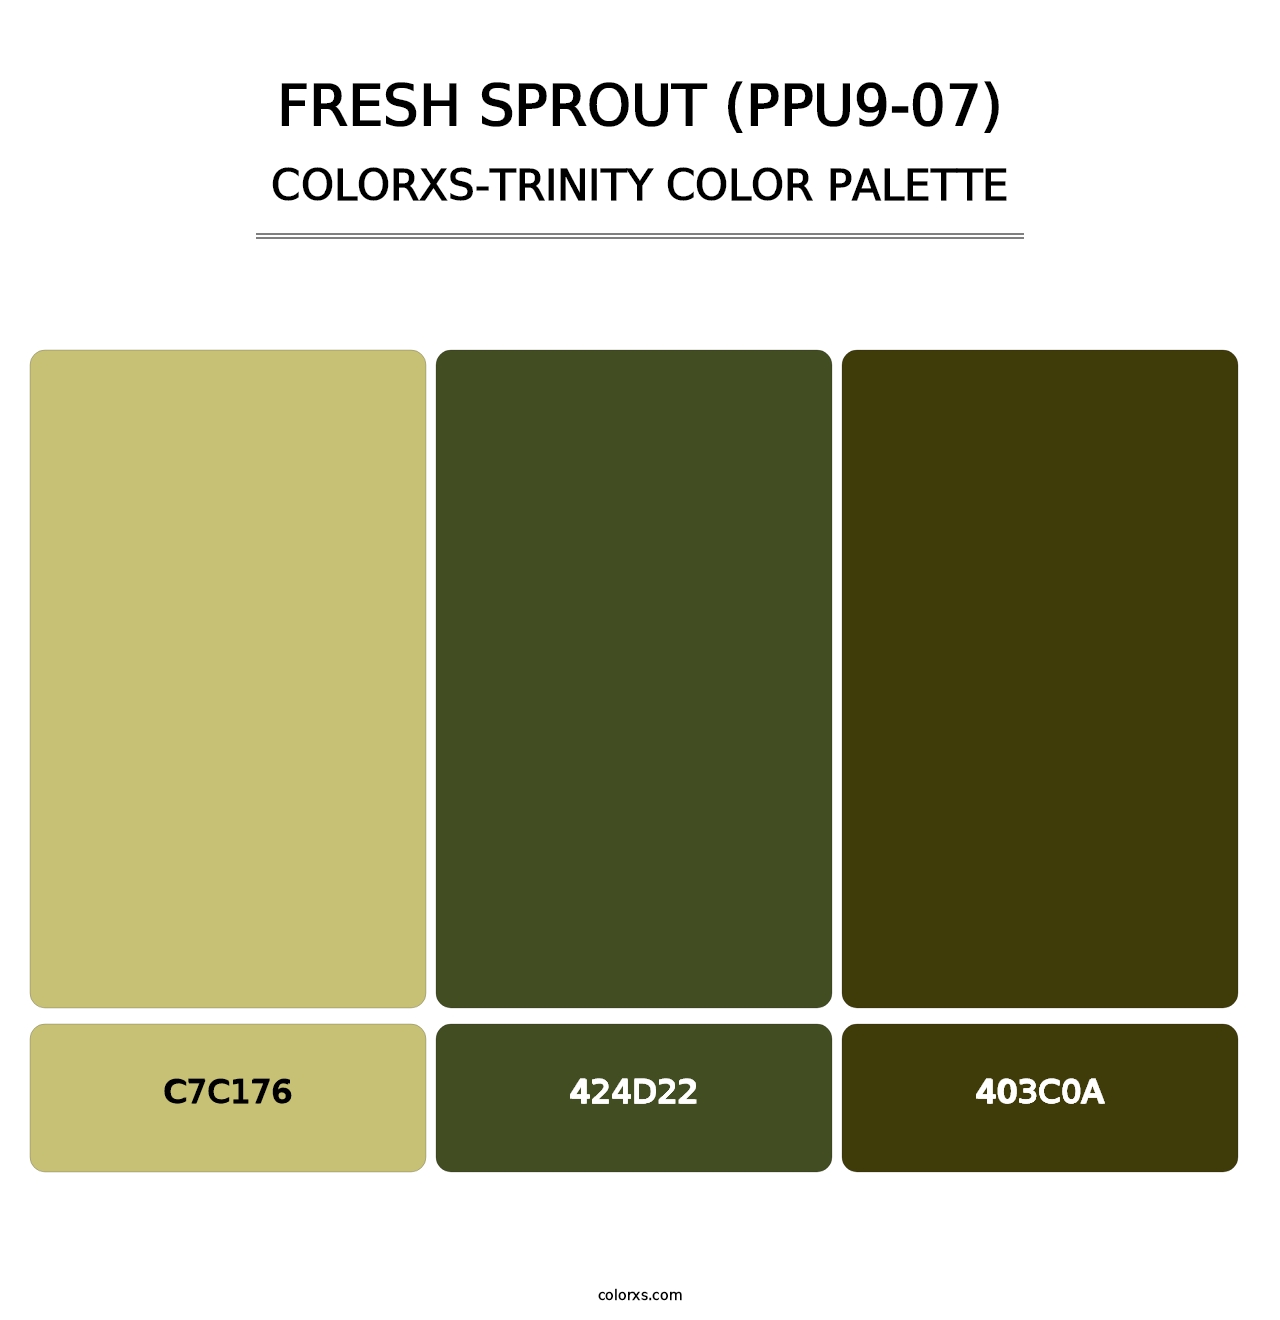 Fresh Sprout (PPU9-07) - Colorxs Trinity Palette